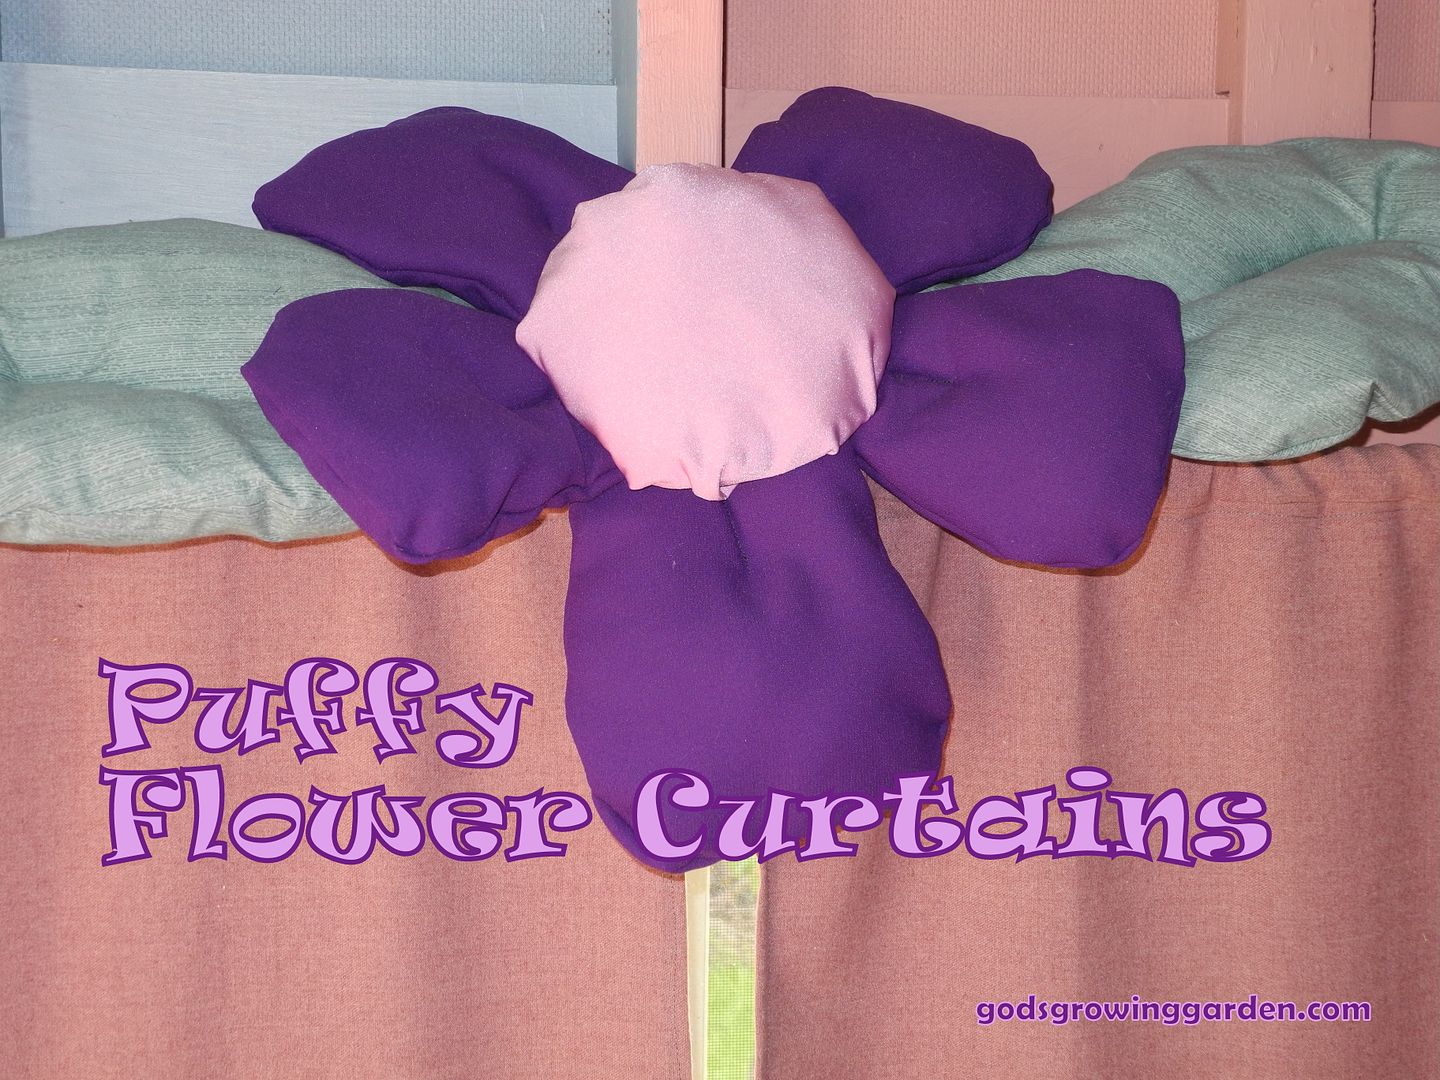 Puffy Flower Curtains by Angie Ouellette-Tower for godsgrowinggarden.com photo DSCN2501_zps7eef9d28.jpg